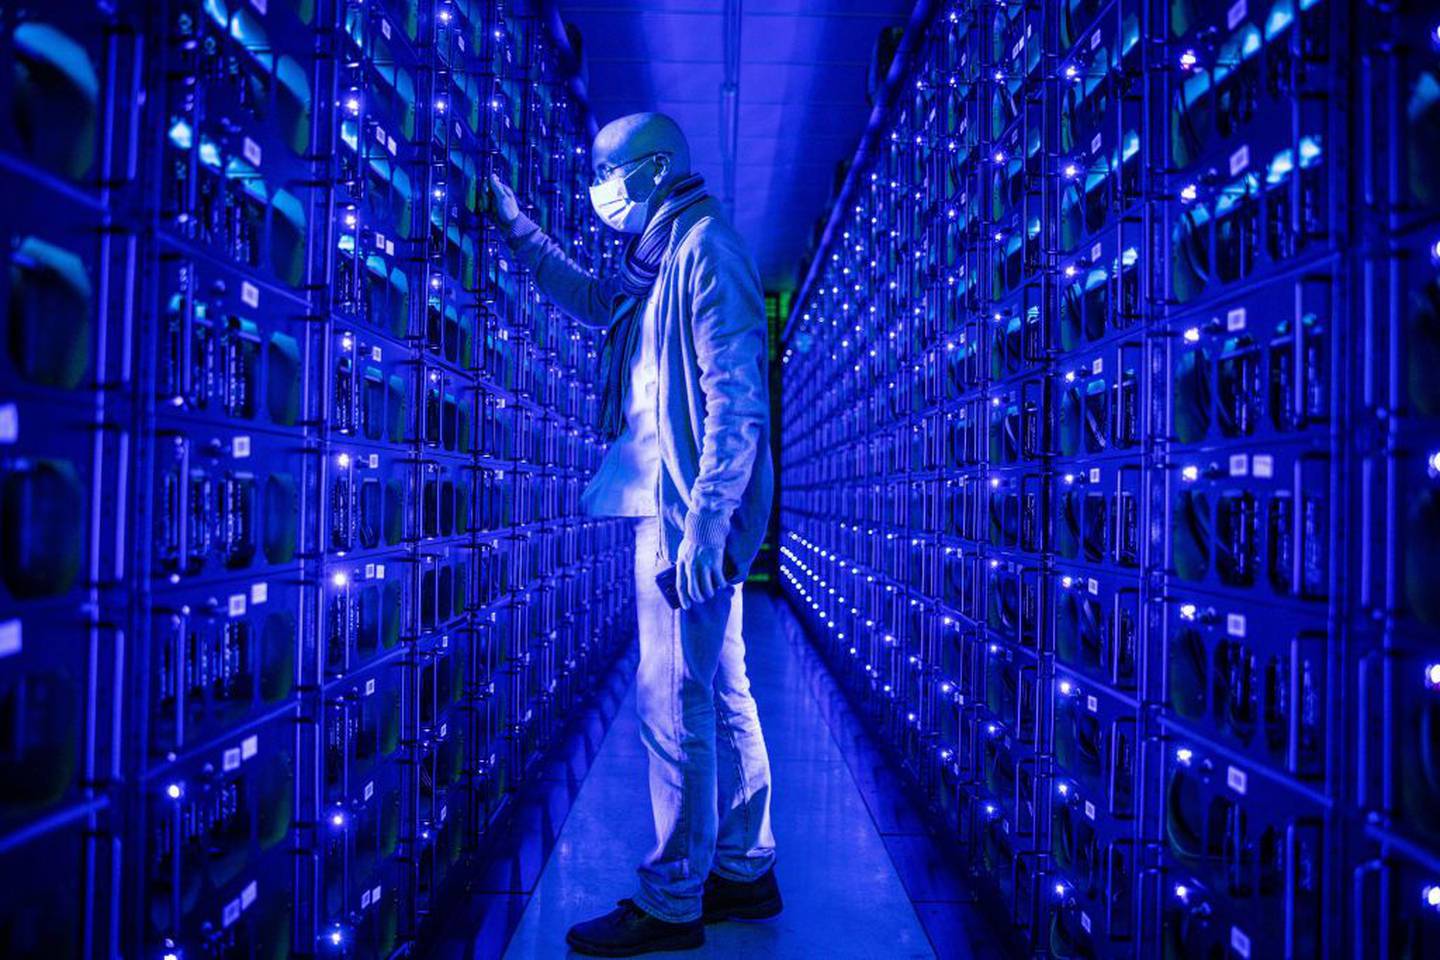 An employee wearing a protective face mask inspects mining rigs mining the Ethereum and Zilliqa cryptocurrencies at the Evobits crypto farm in Cluj-Napoca, Romania, on Wednesday, Jan. 22, 2021.